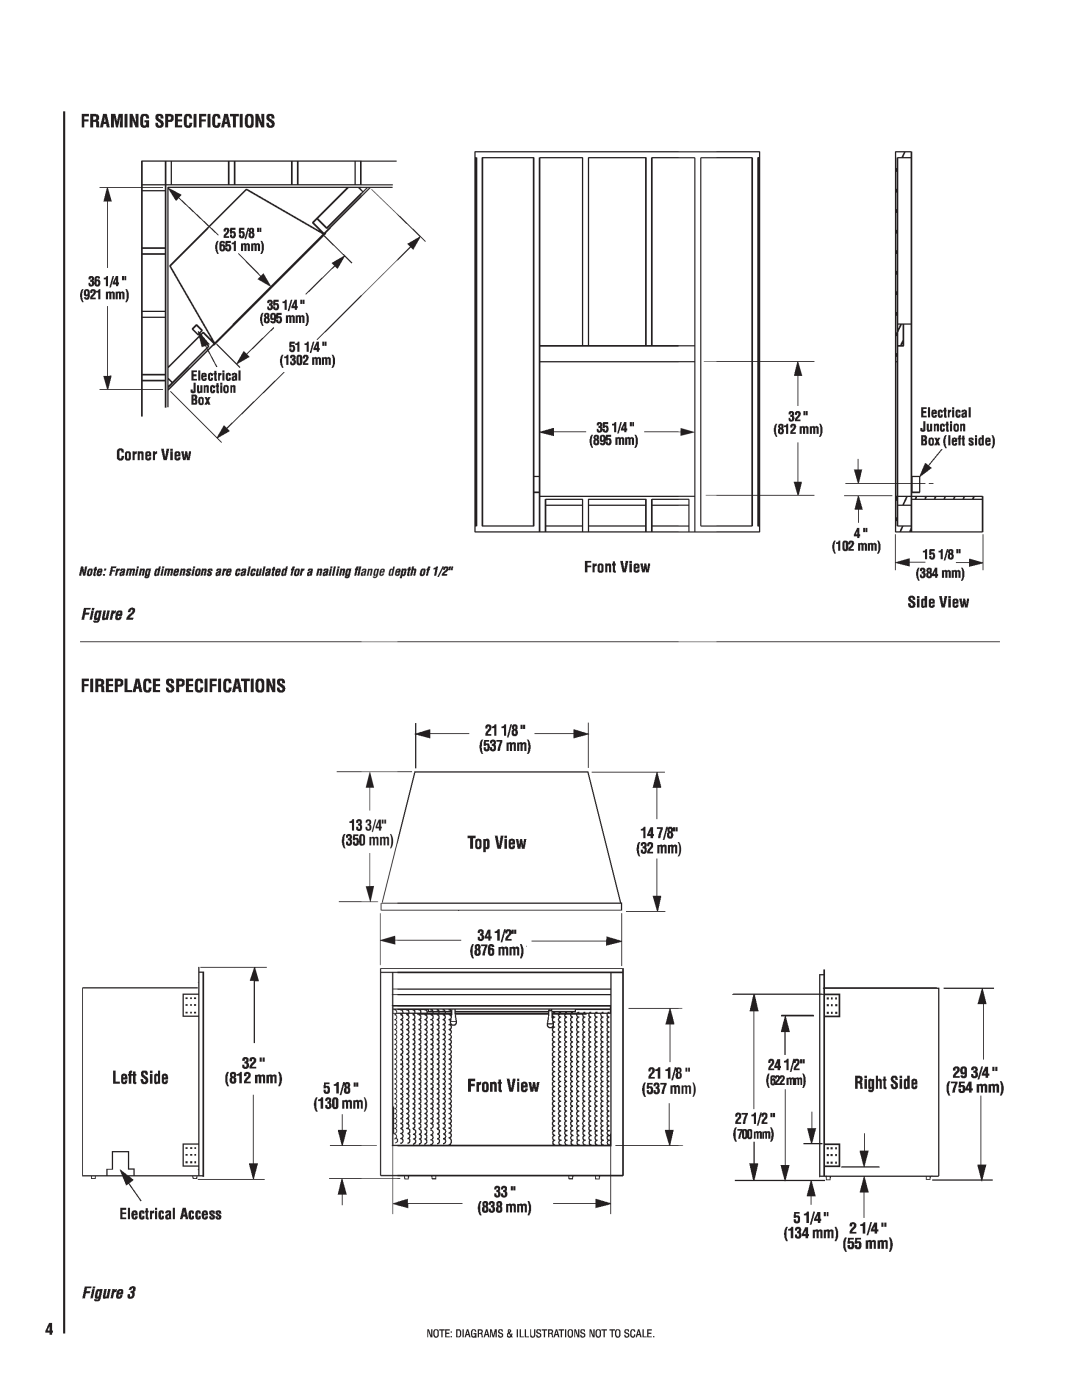 Matsushita MPE-33R warranty Framing Specifications, Fireplace Specifications, Left Side 